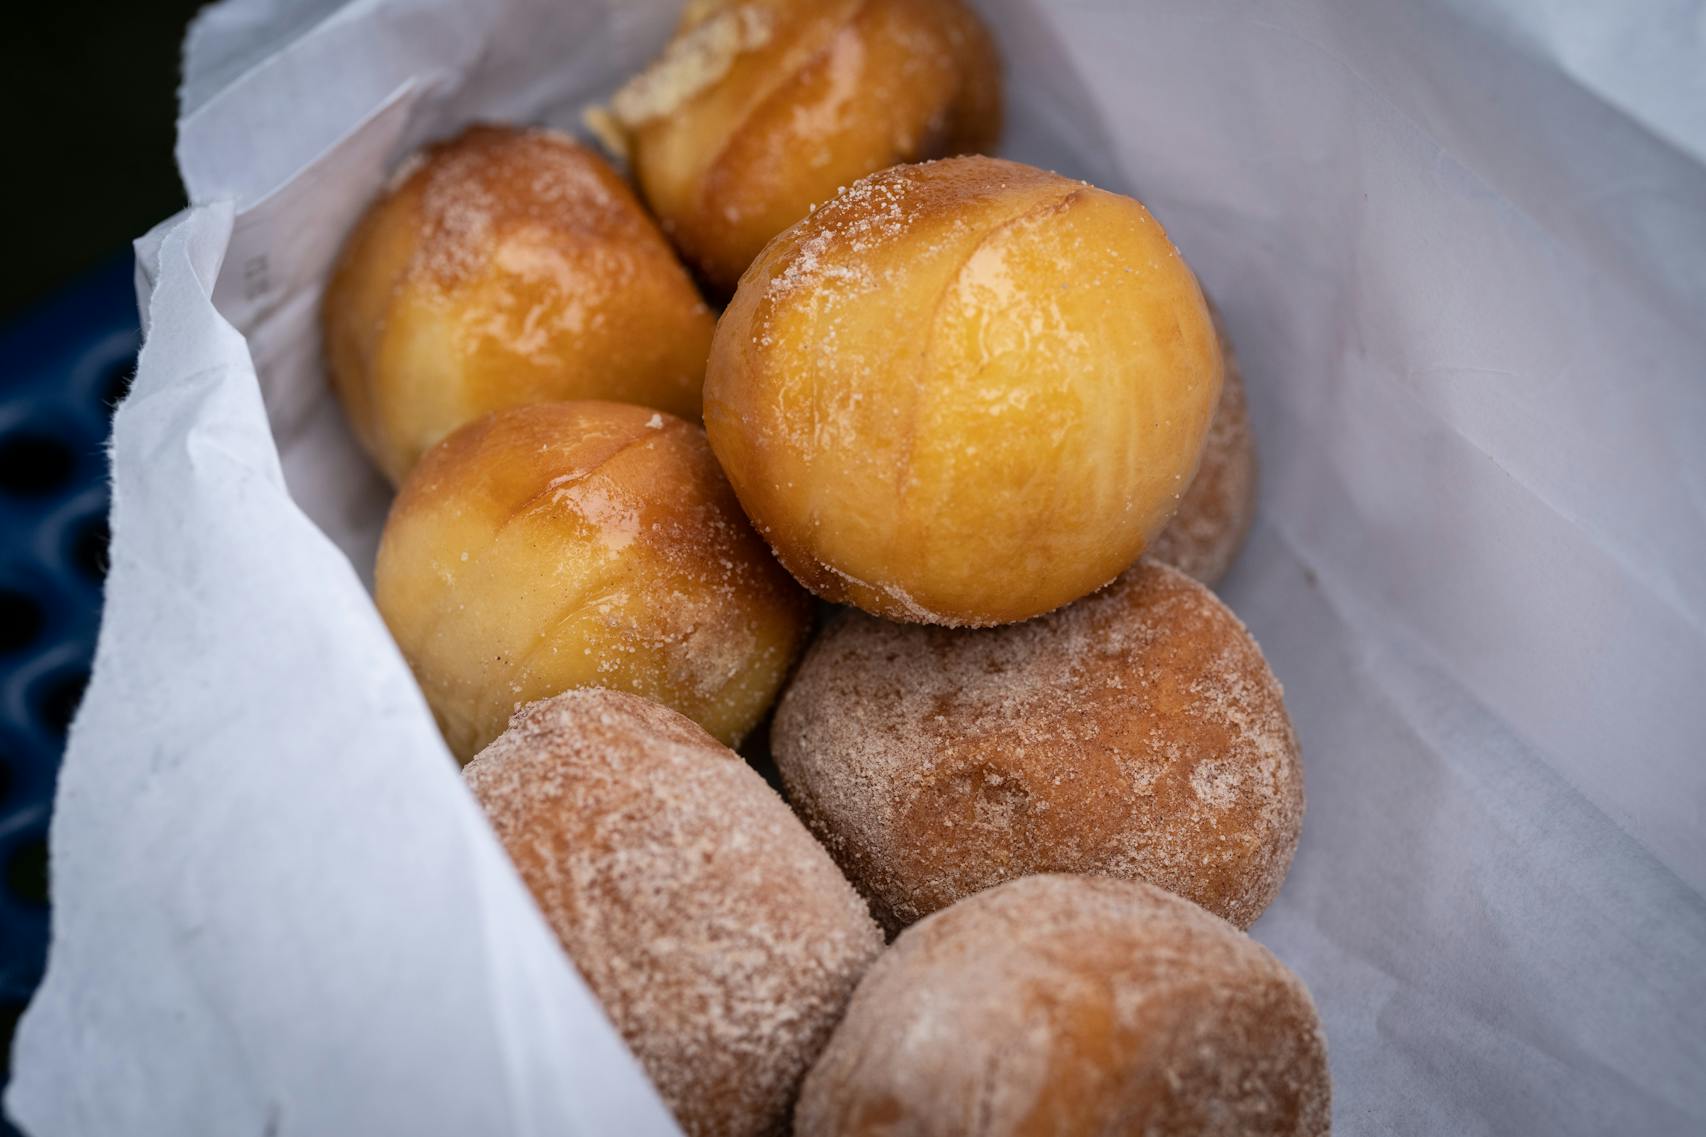 Donut Holes from Fluffy’s Hand Cut Donuts. New foods at the Minnesota State Fair photographed on Thursday, Aug. 25, 2022 in Falcon Heights, Minn. ] RENEE JONES SCHNEIDER • renee.jones@startribune.com